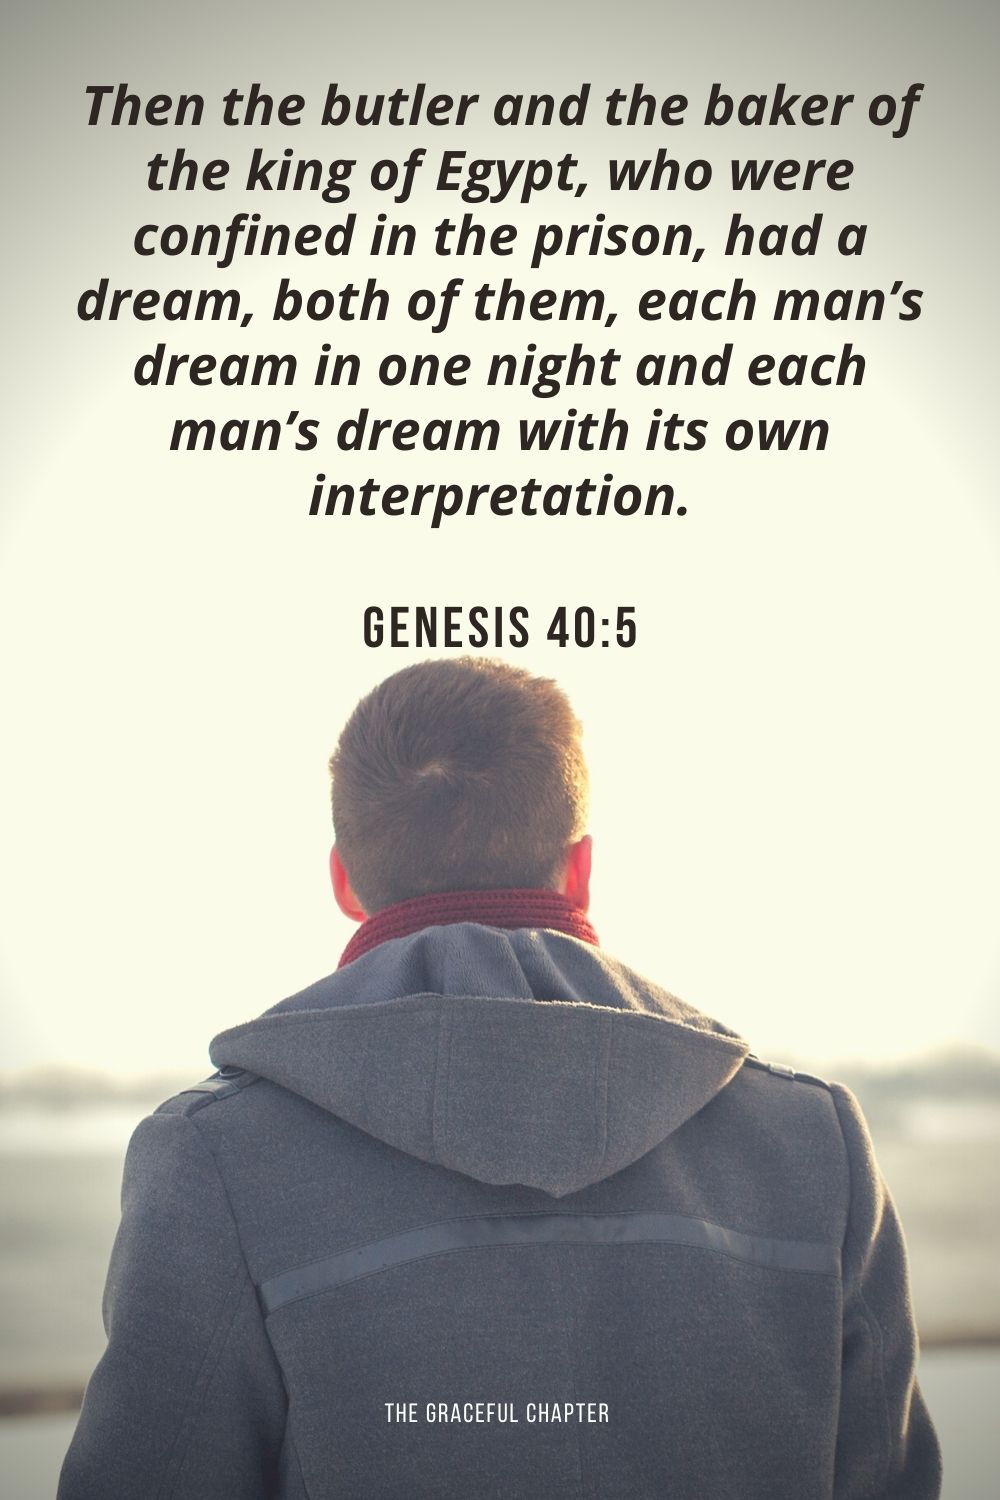 Then the butler and the baker of the king of Egypt, who were confined in the prison, had a dream, both of them, each man’s dream in one night and each man’s dream with its own interpretation. Genesis 40:5